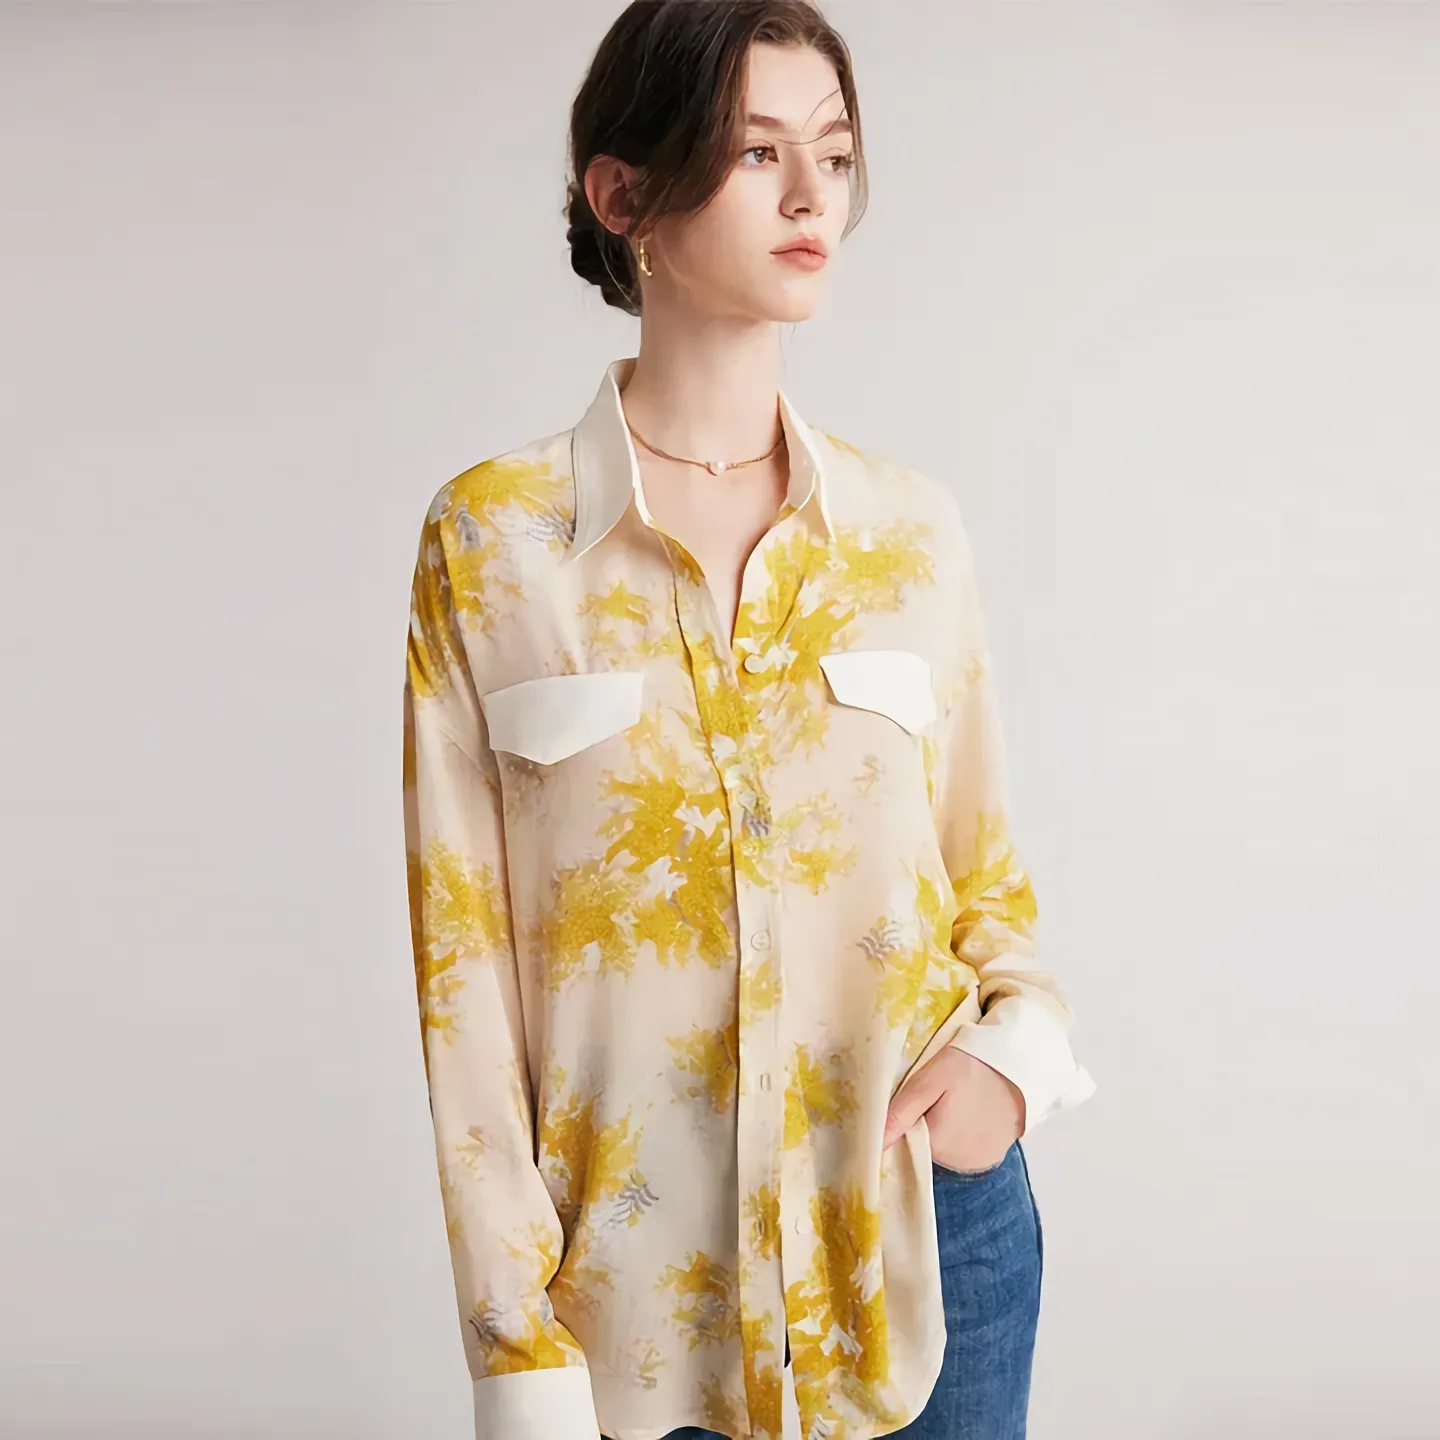 Crepe Silk Blouse Shirt Yellow Floral For Women REAL SILK LIFE